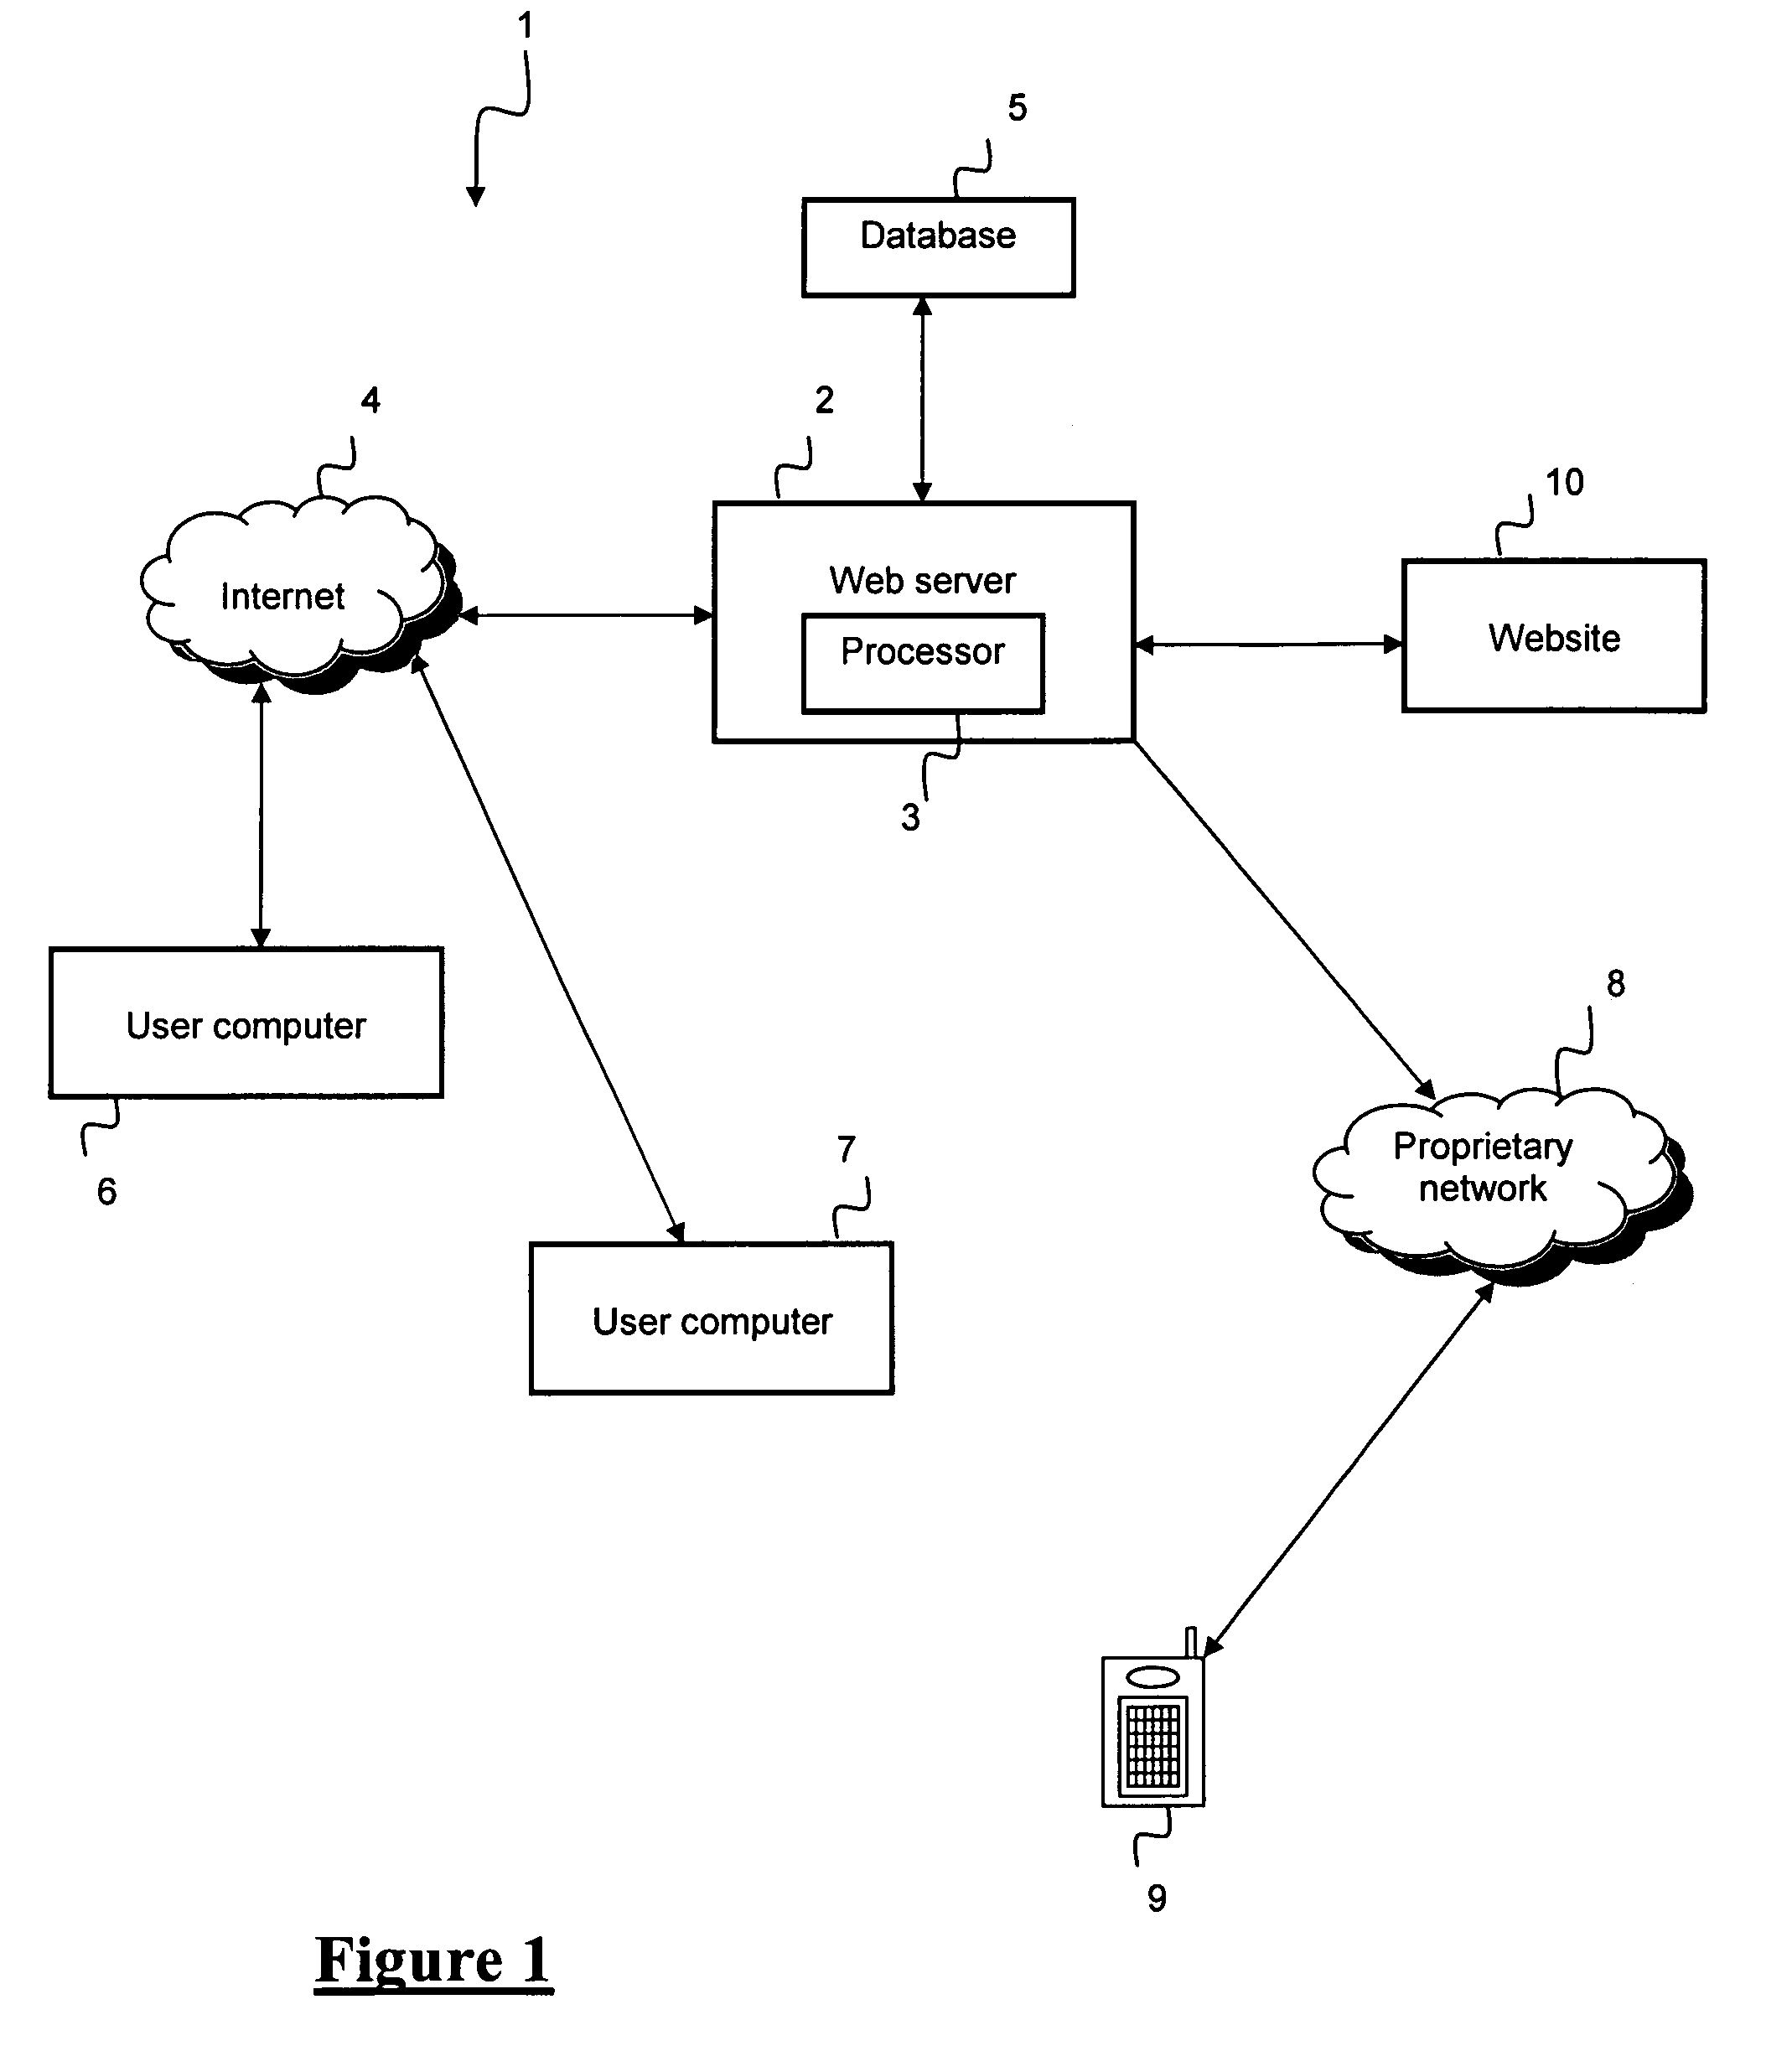 Personal contact network